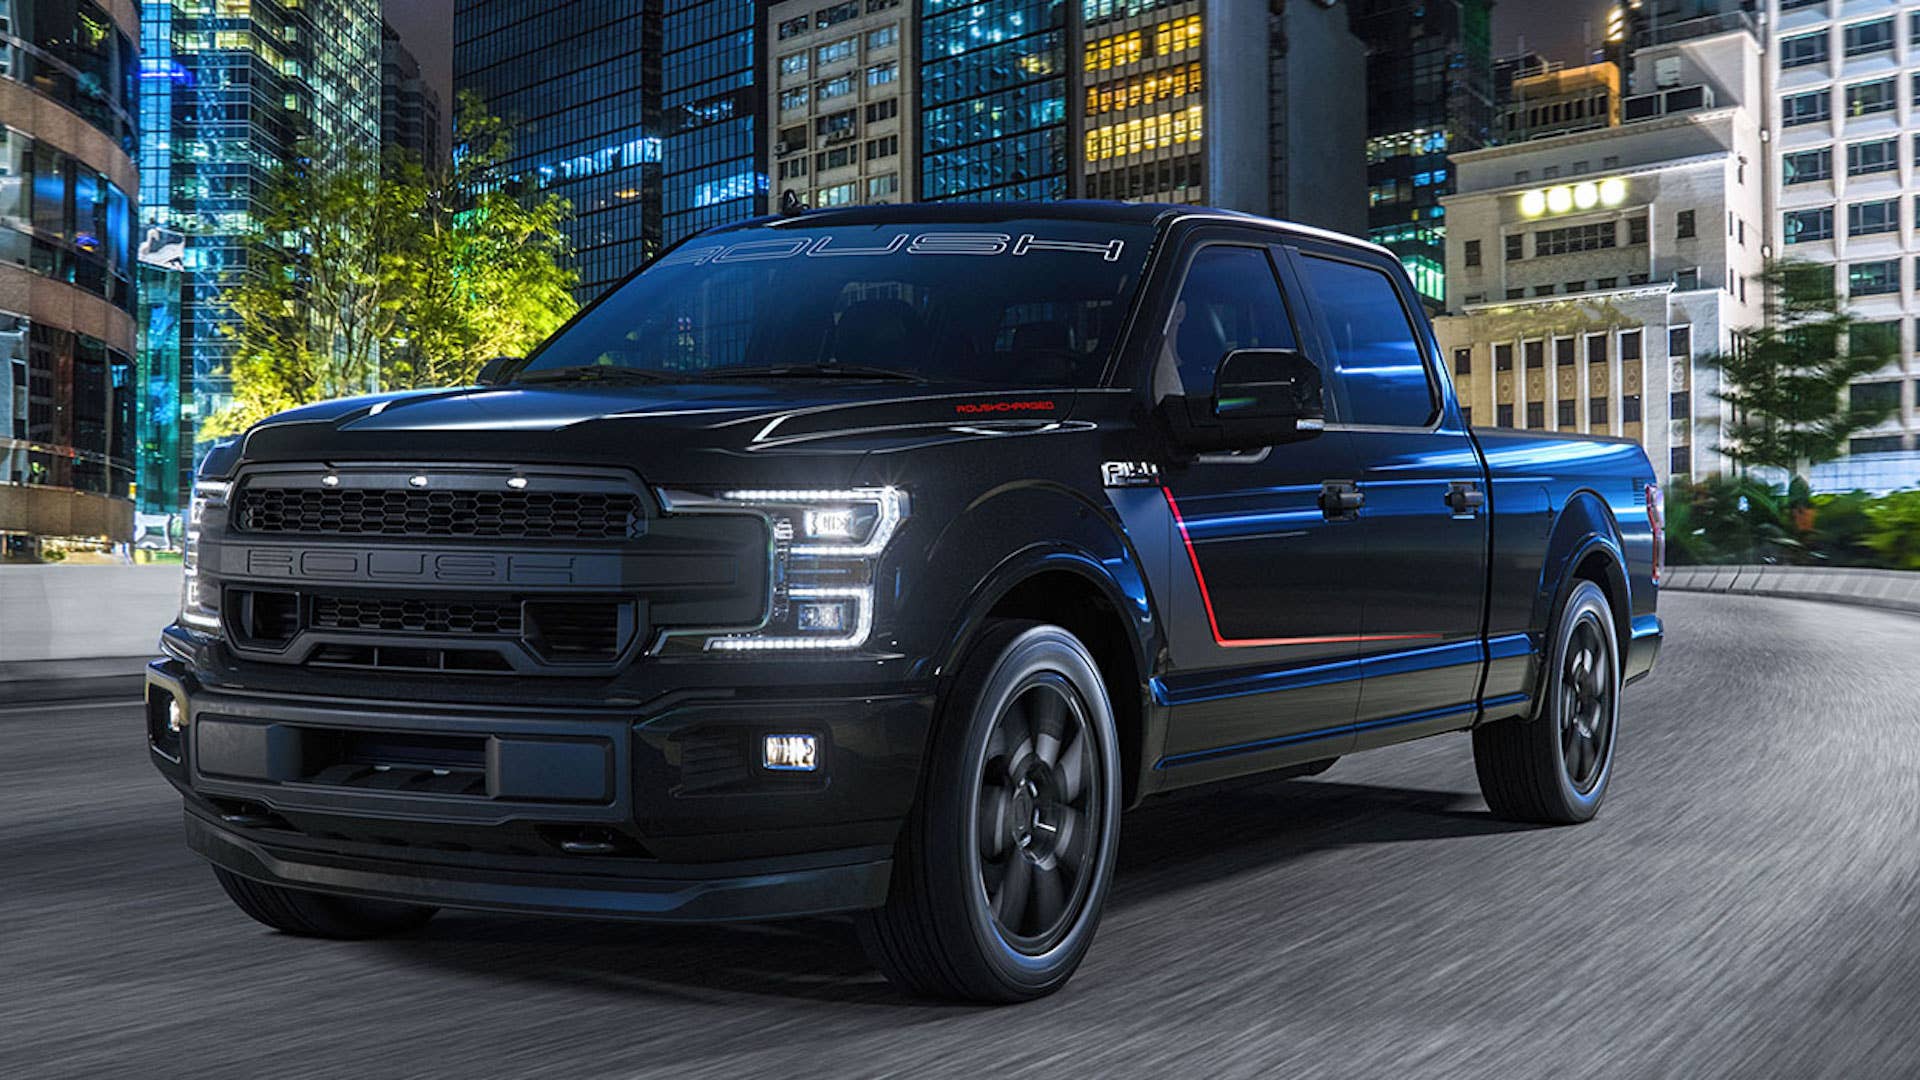 Roush Unleashes Supercharged Ford F150 Nitemare Edition Pickup With 650 HP